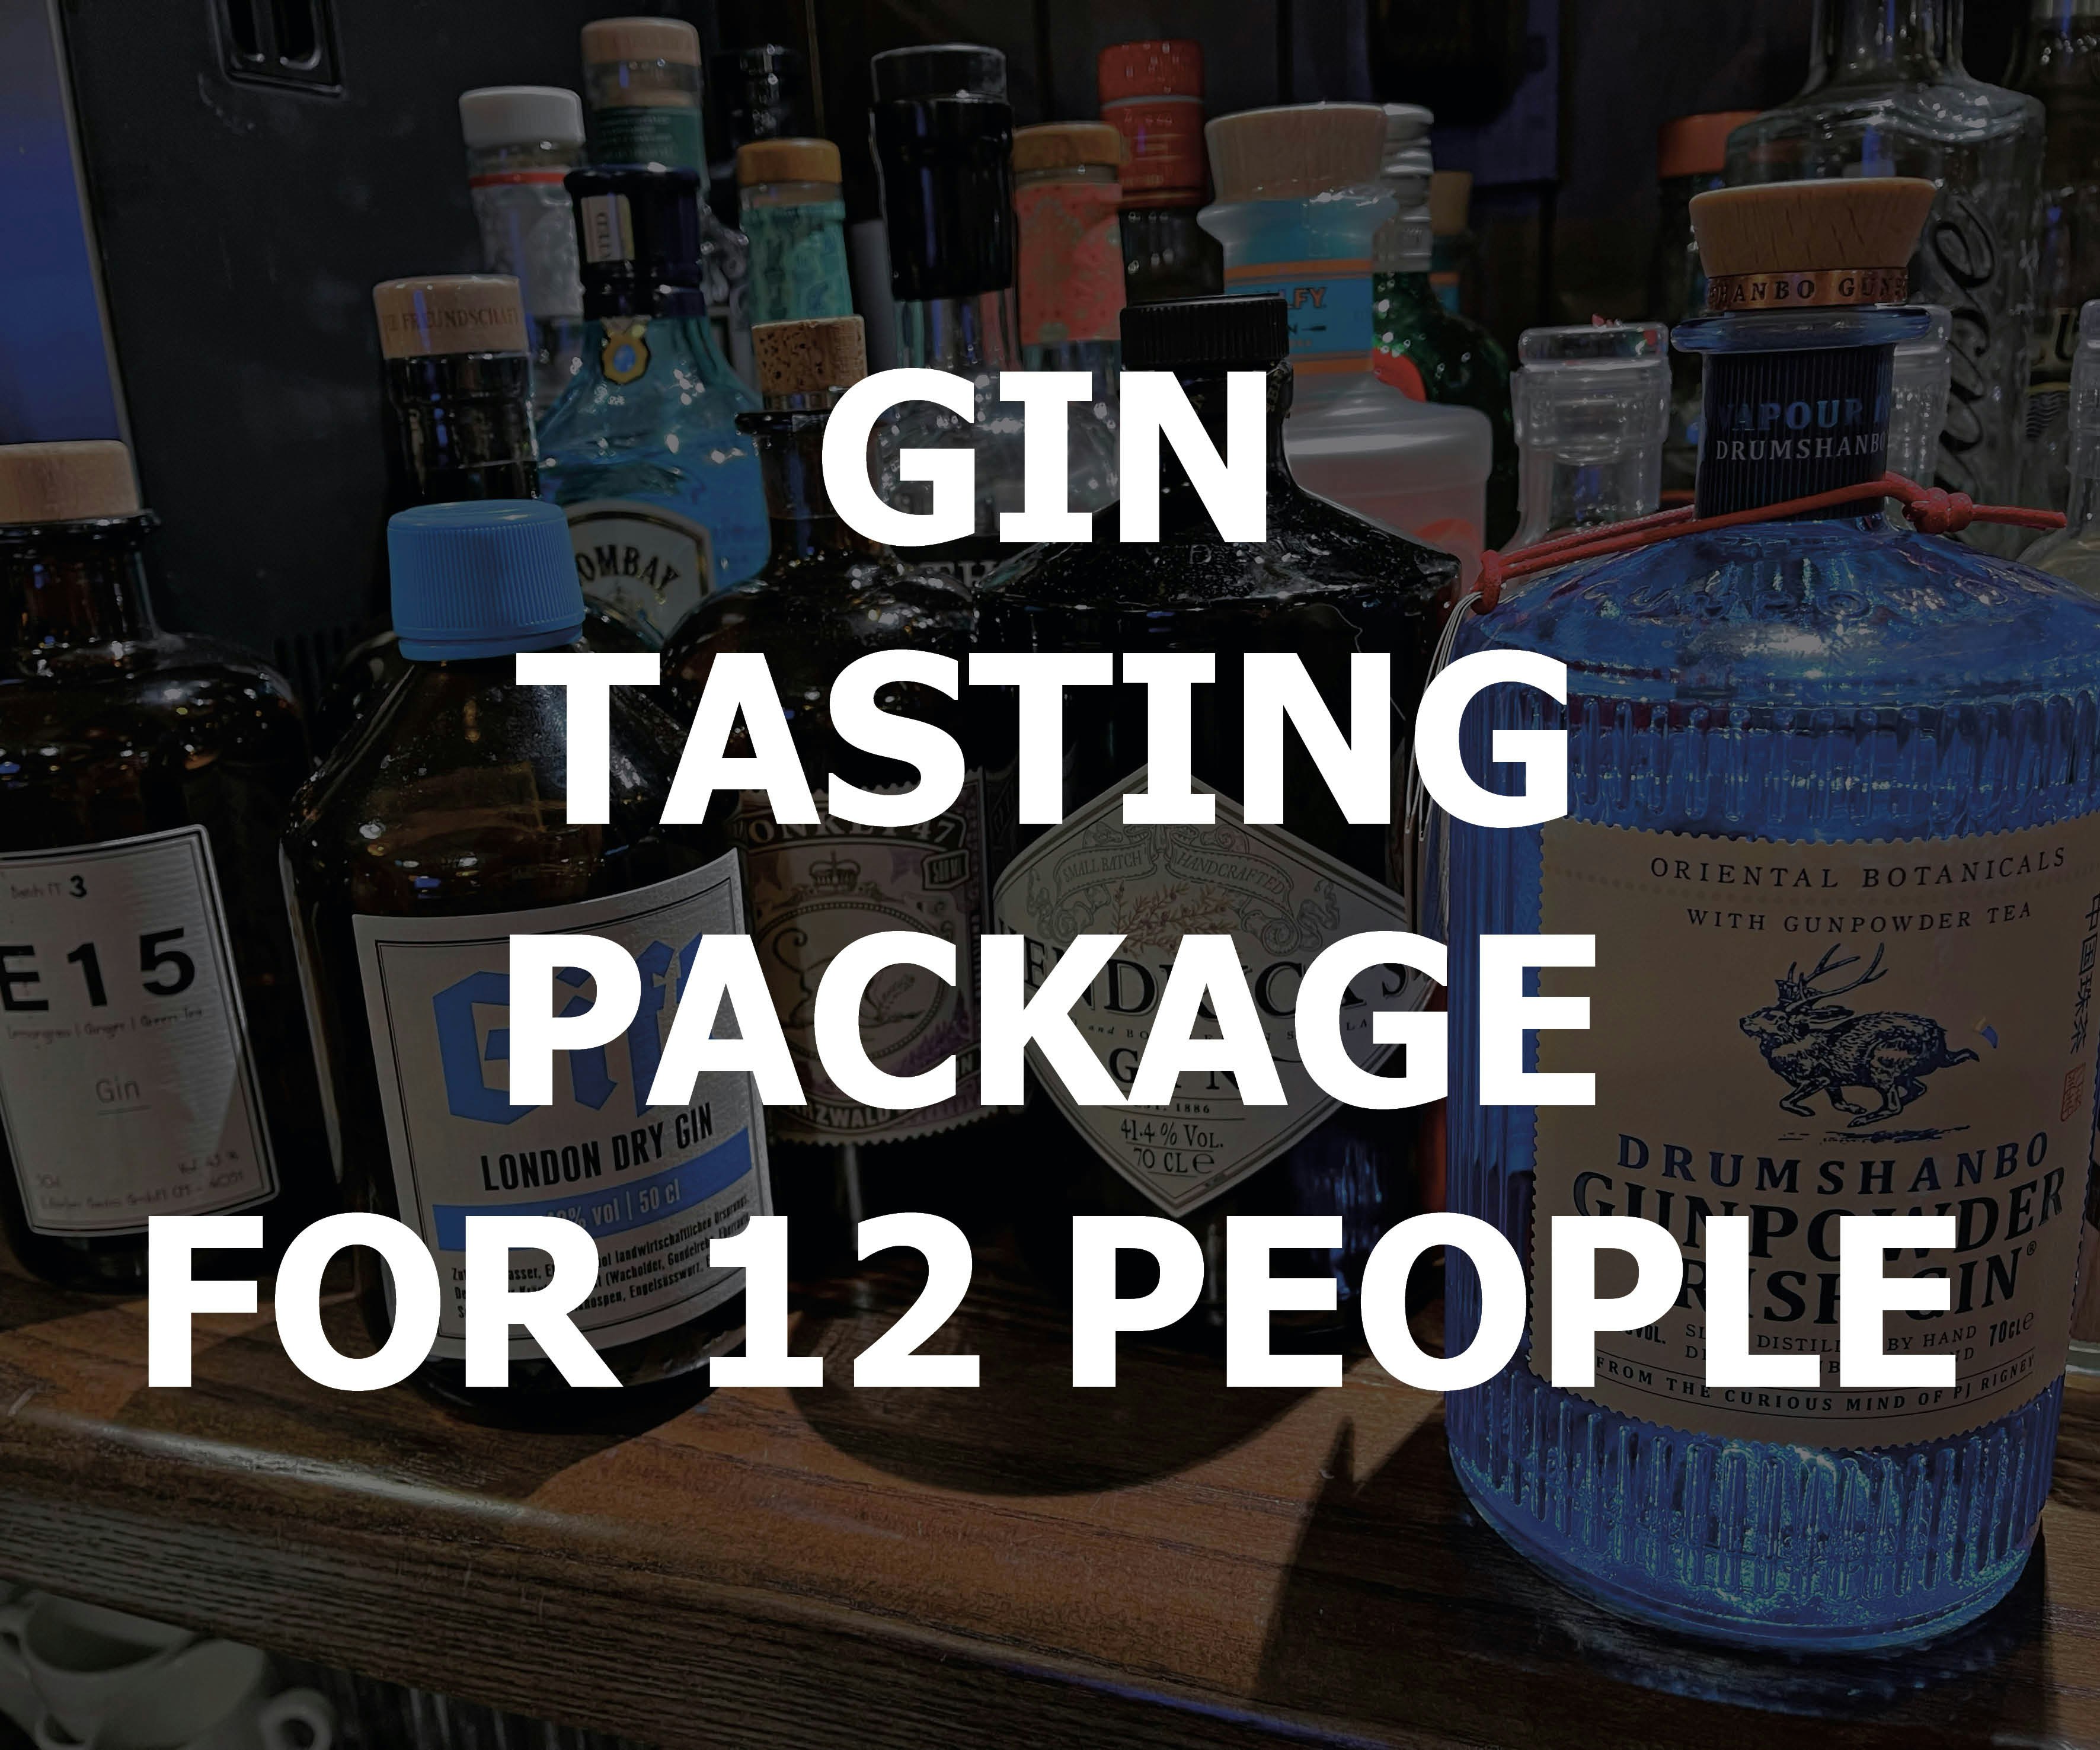 Gin tasting package for 12 people